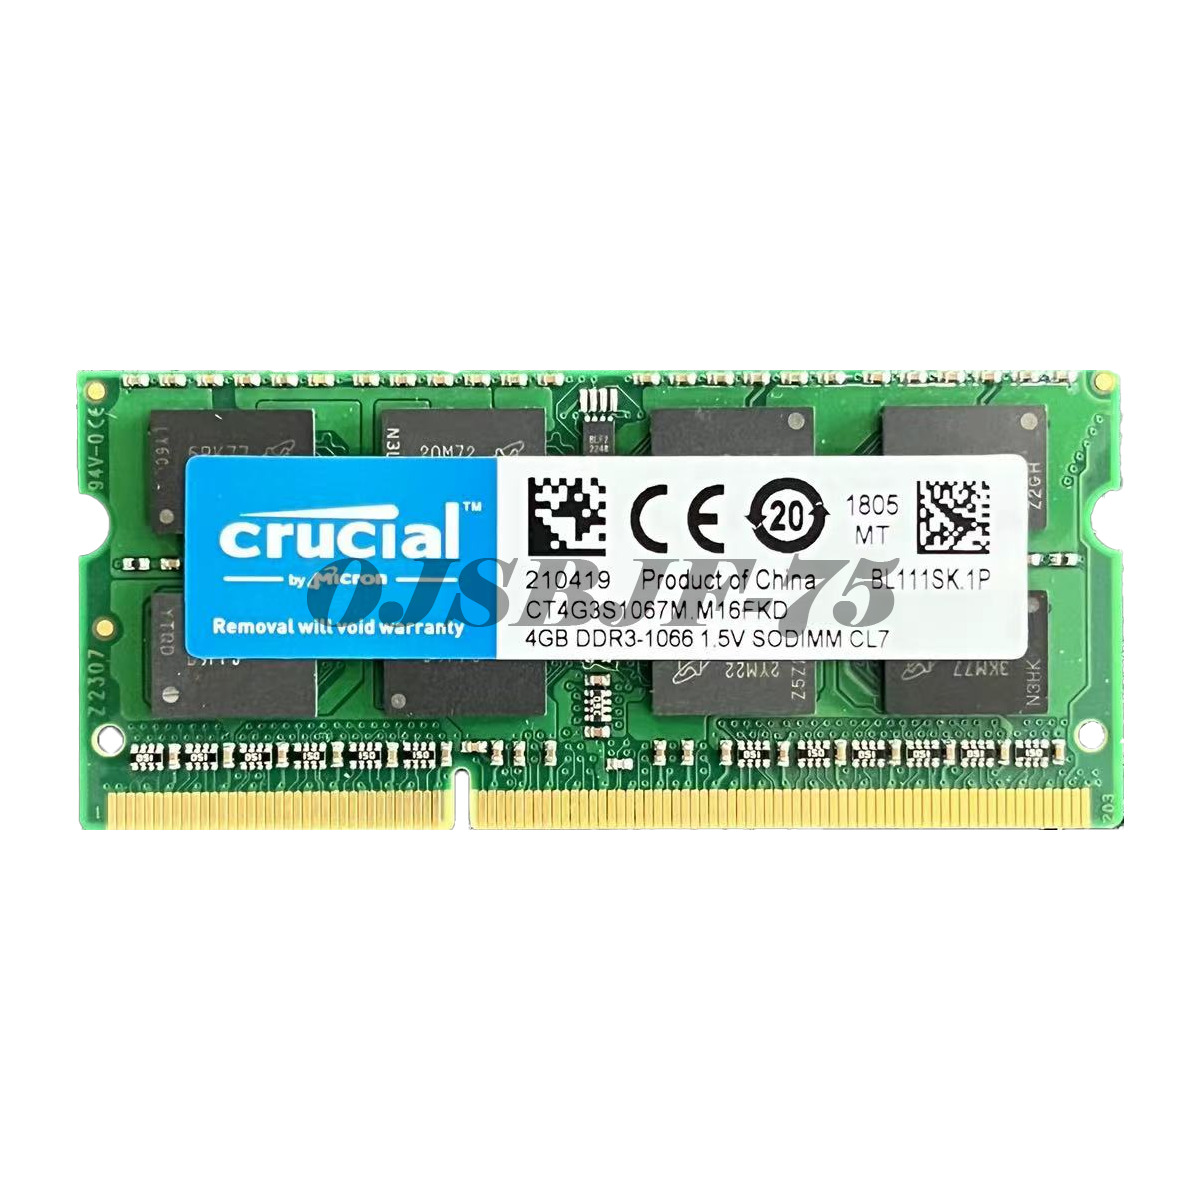 Crucial PC3-8500 8GB 4GB SO-DIMM 1066 MHz PC3-8500 DDR3 Memory  (CT4G3S1067M)